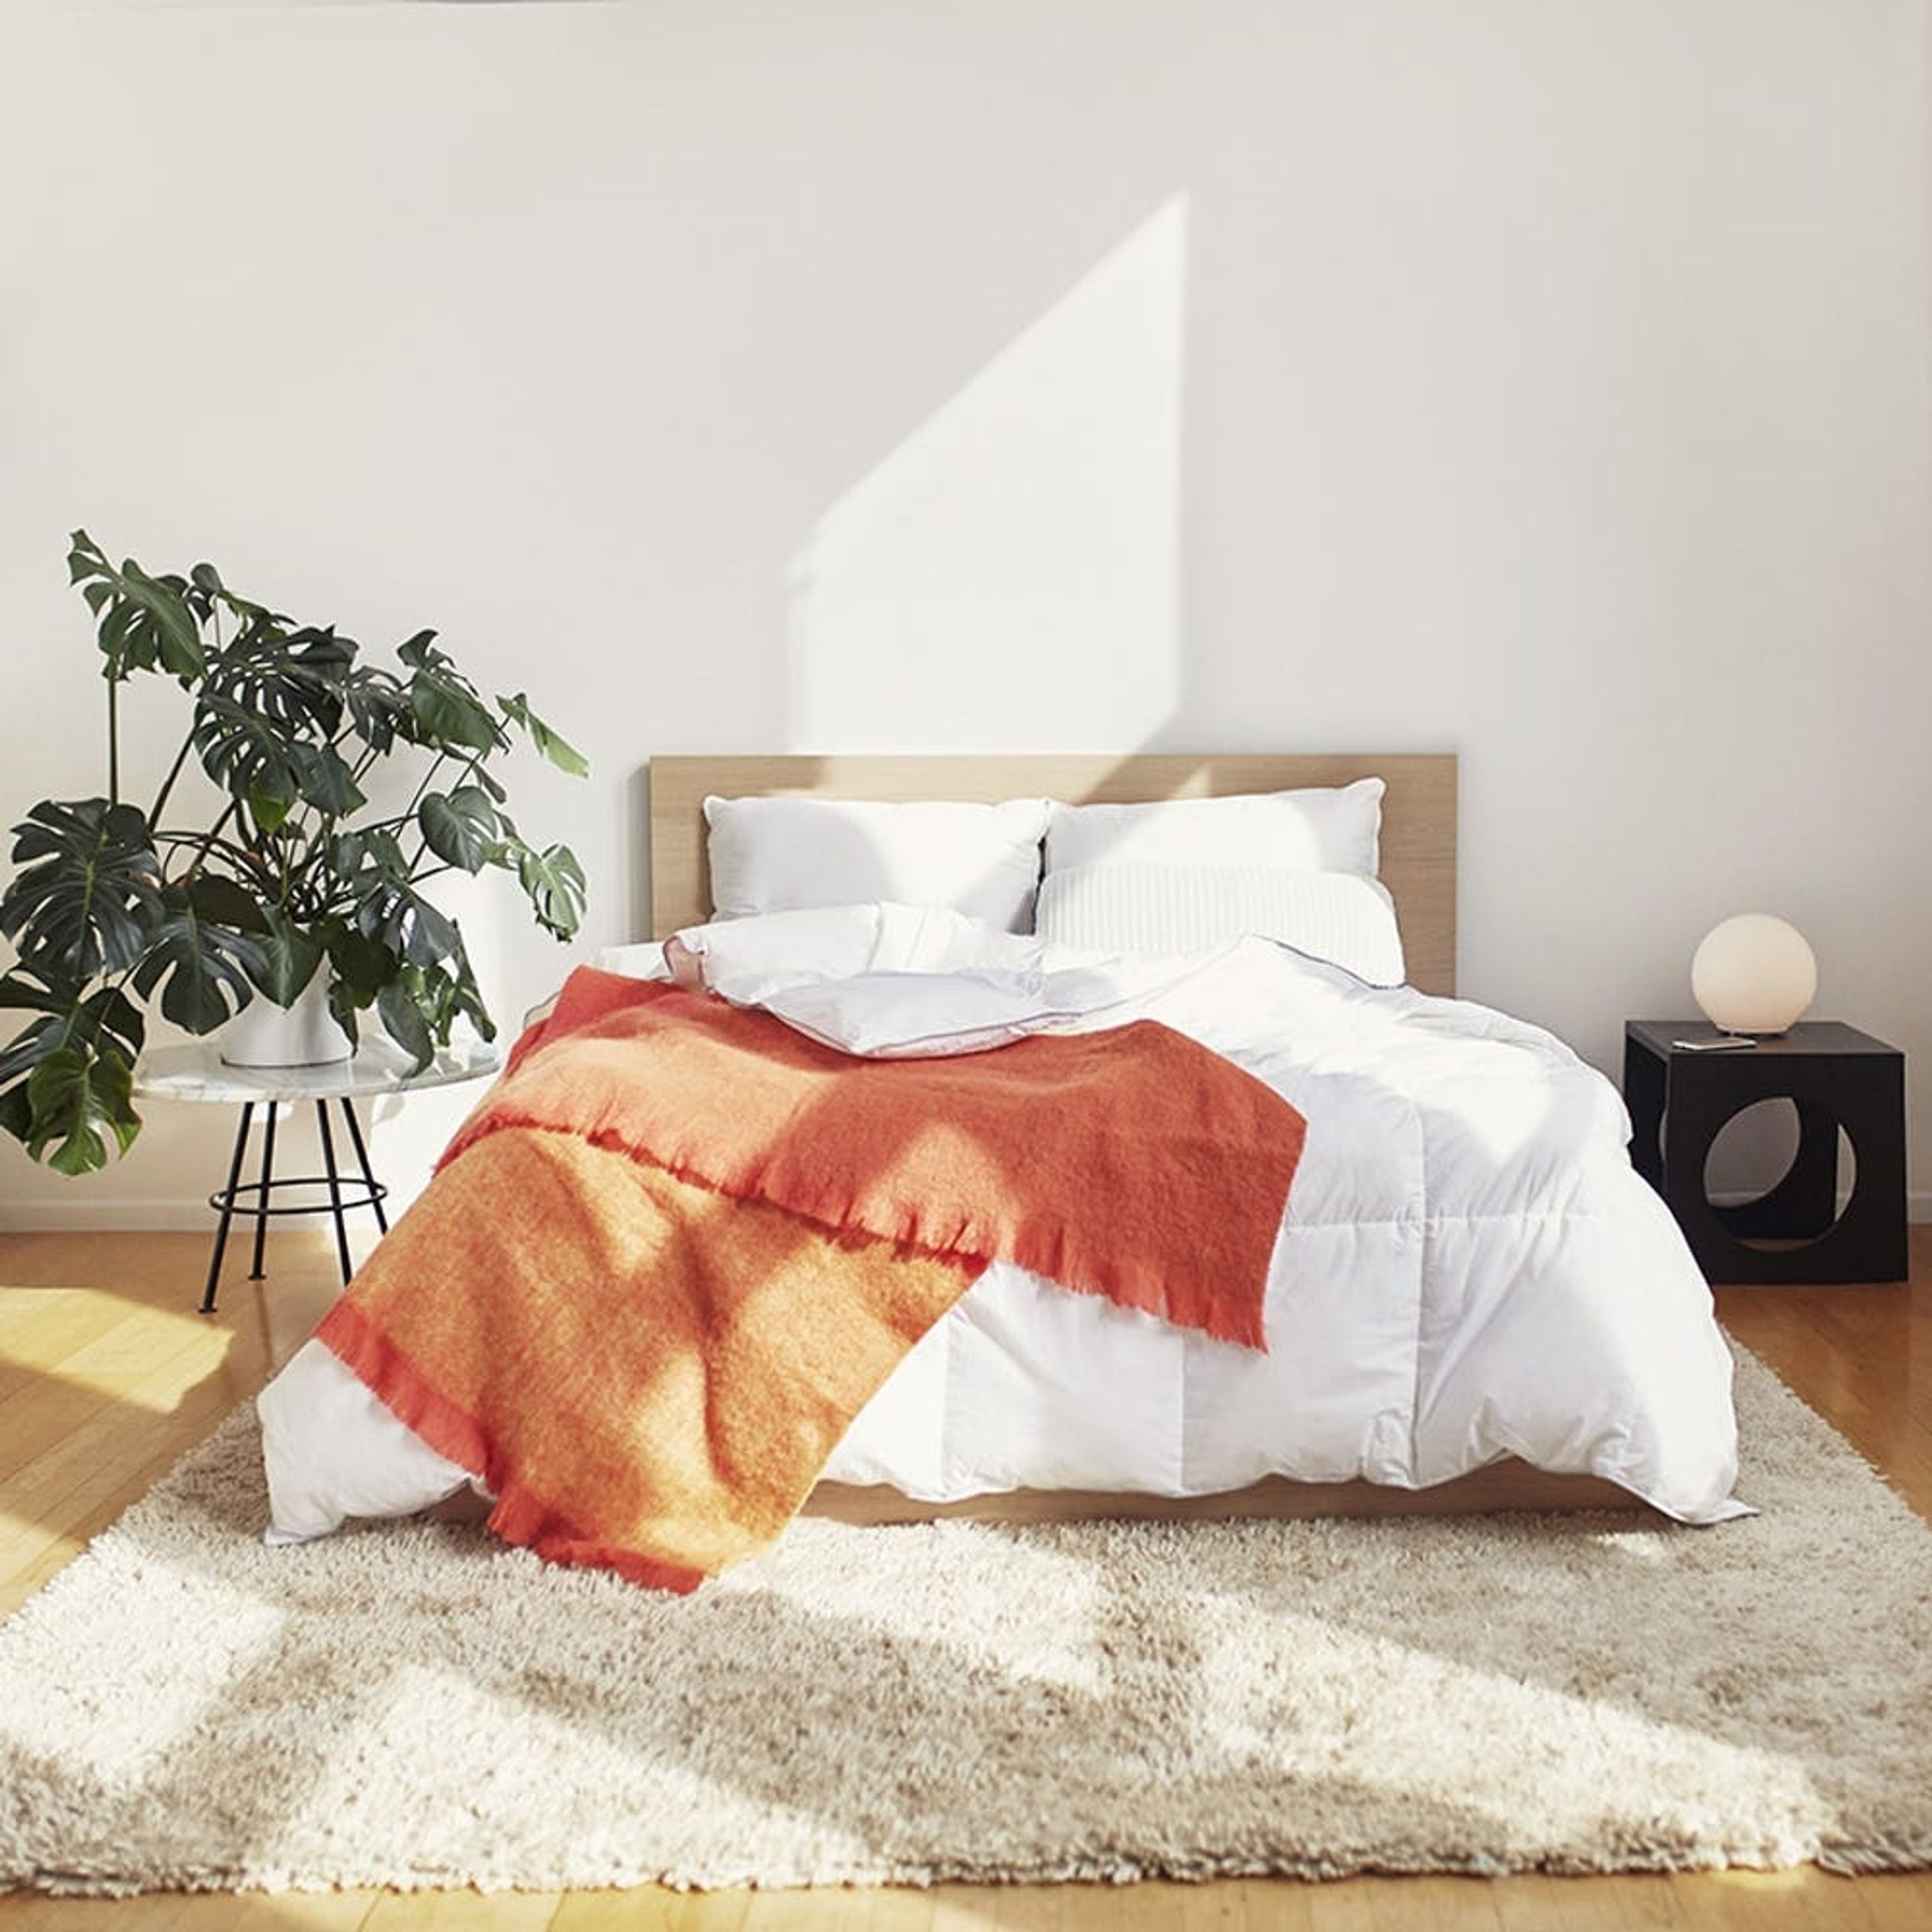 5 New Mattress Brands That Promise More Than Just Comfort